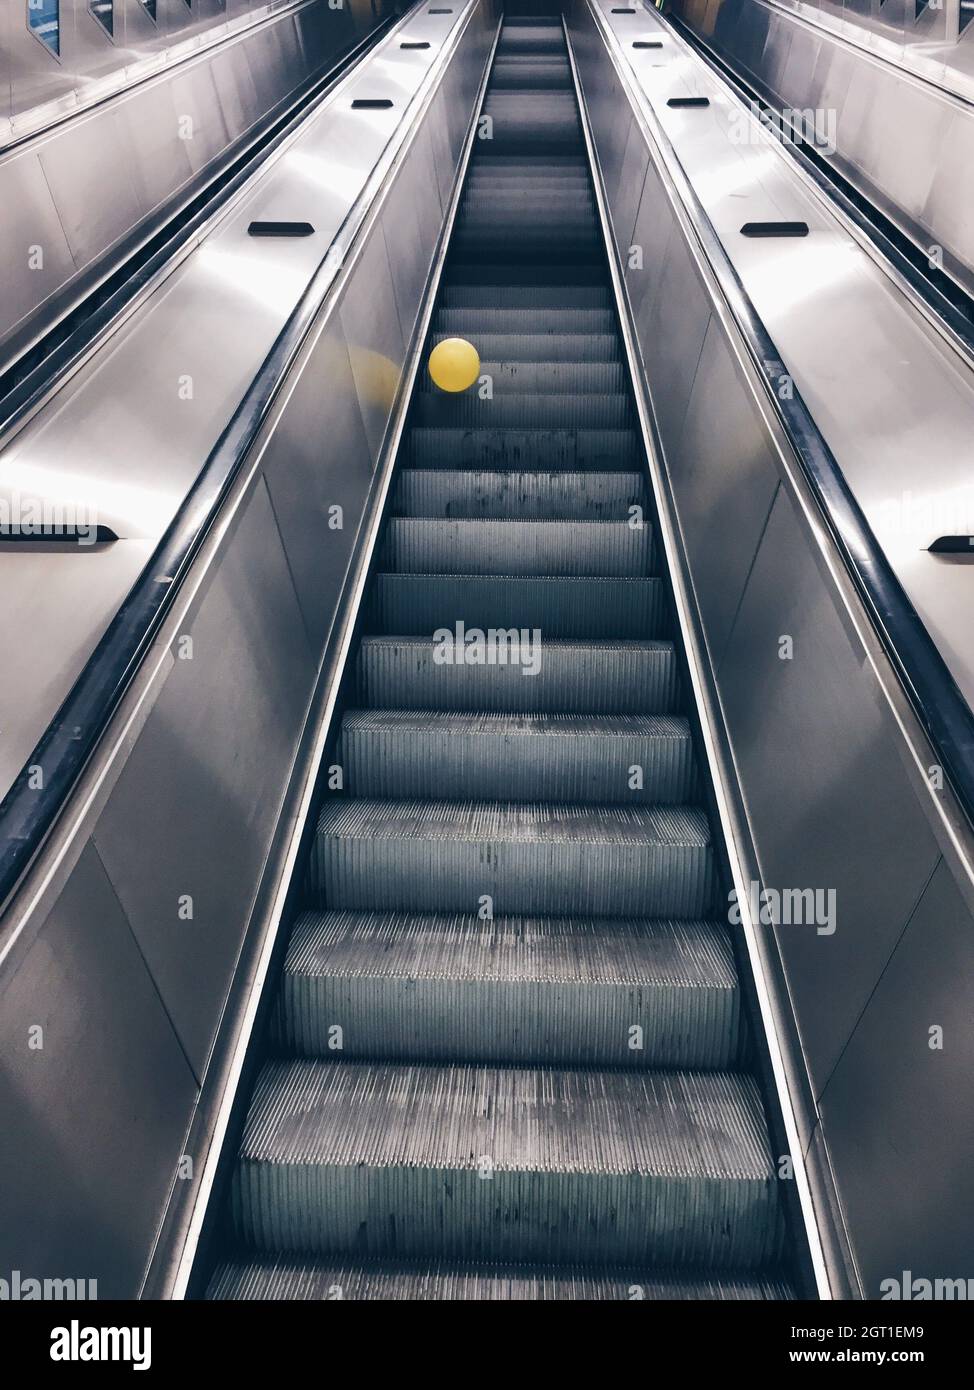 Exploring The Void, Metallic Structure, Escalator, Lonely Balloon, Conceptual, No People, Going Up Stock Photo